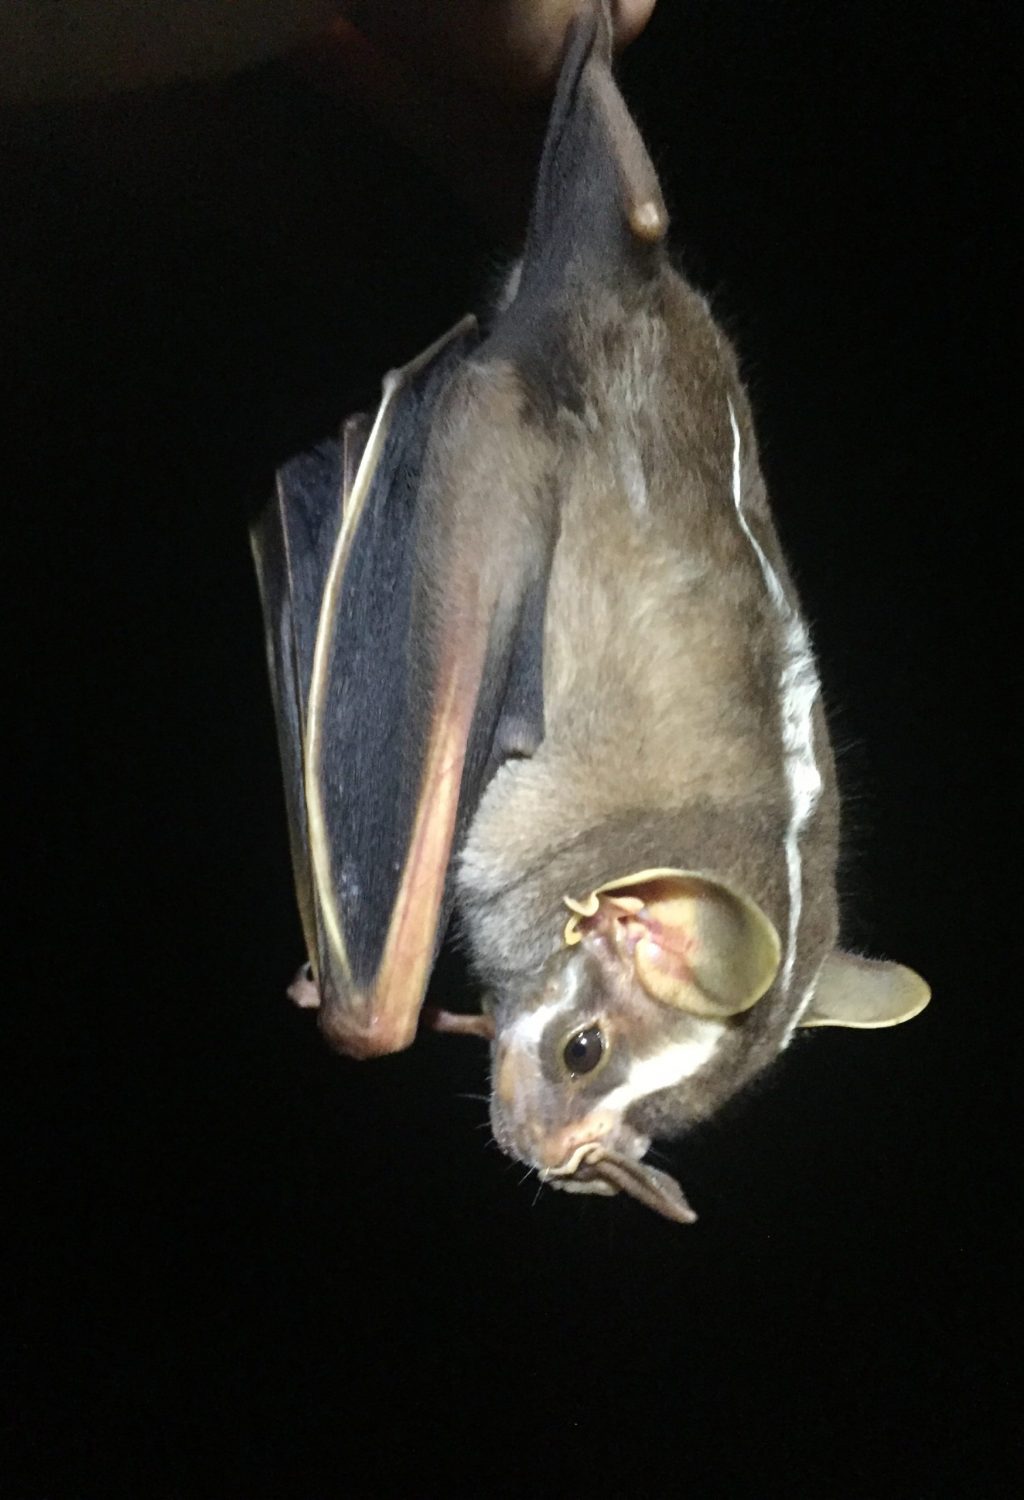 A stripe-y fruit-eating bat, captured in Panama last October. I think it is a great stripe-faced bat (Vampryodes carraccioli), but was not able to ID it in the field.